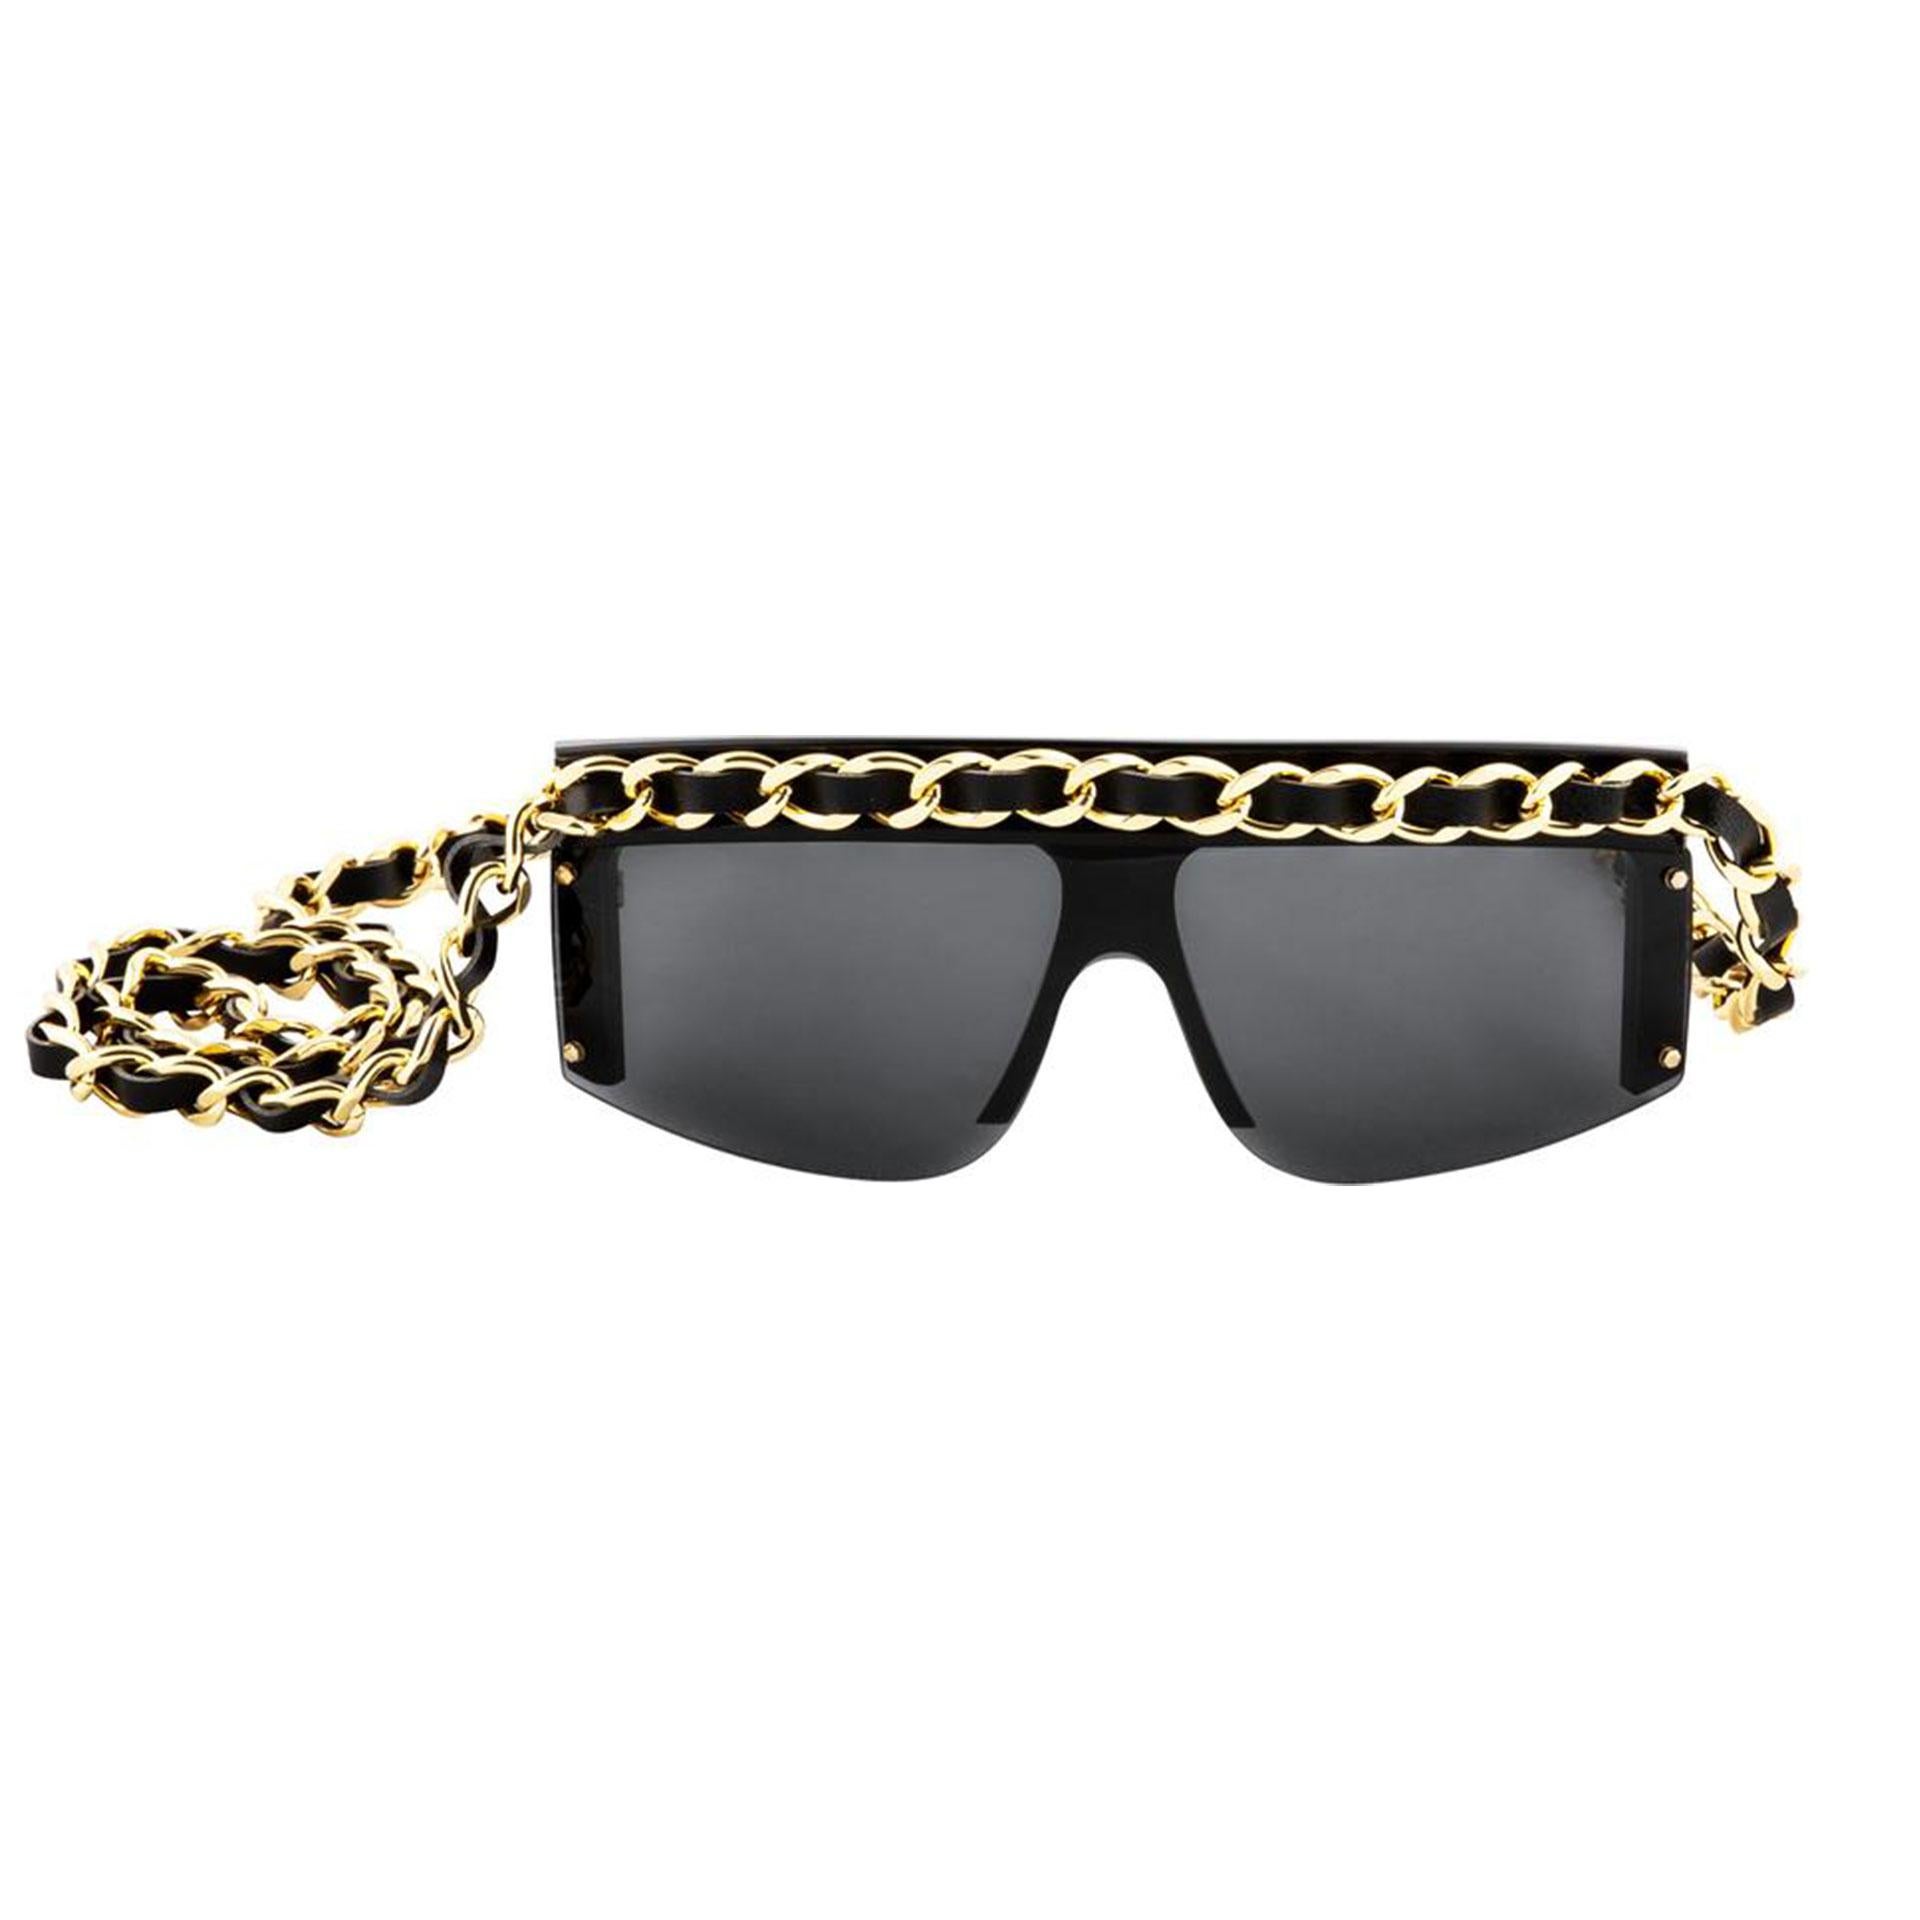 Chanel Black and Gold Rare Vintage Runway Long Chain Necklace Sunglasses

These are the most sought after Vintage  Chanel Sunglasses and are considered as the 